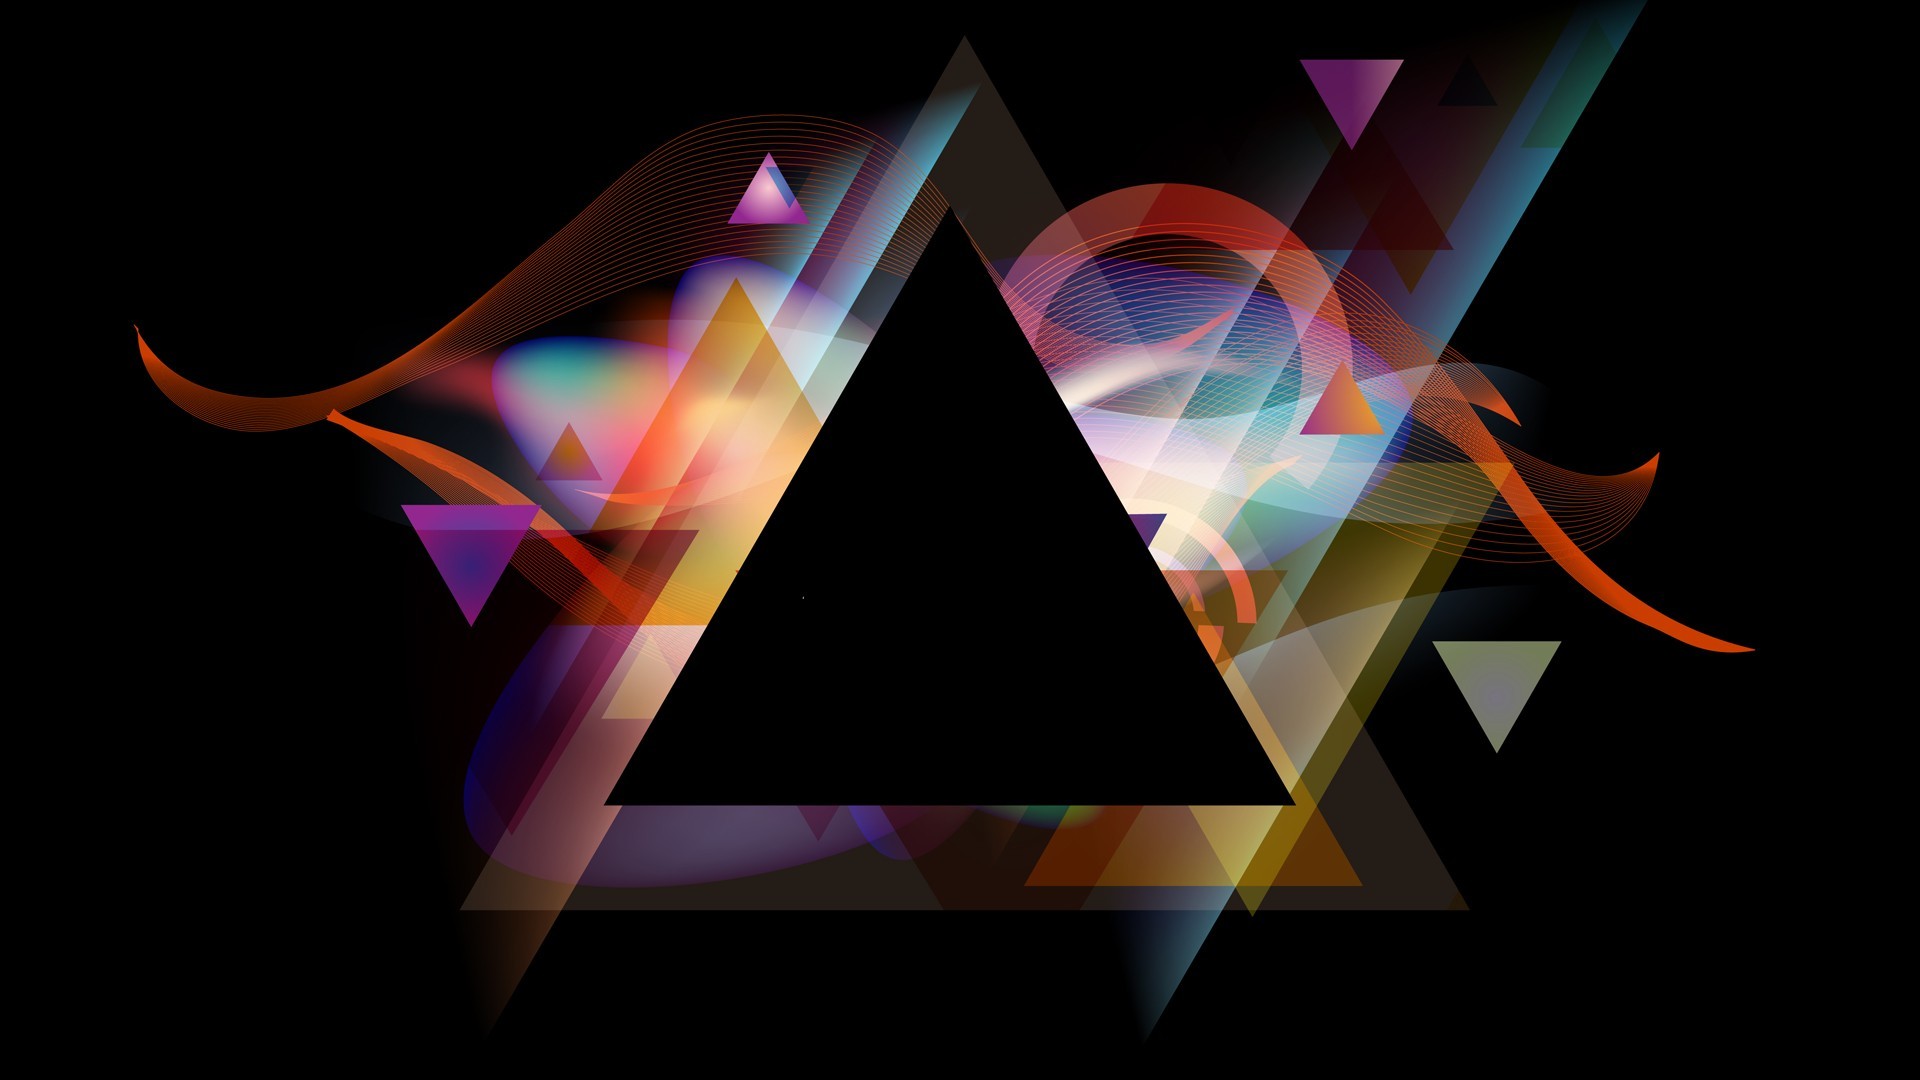 1920x1080 Outstanding Hd Illuminati Wallpapers for Ipad px Â· The TriangleArt  BackgroundWallpaper ...